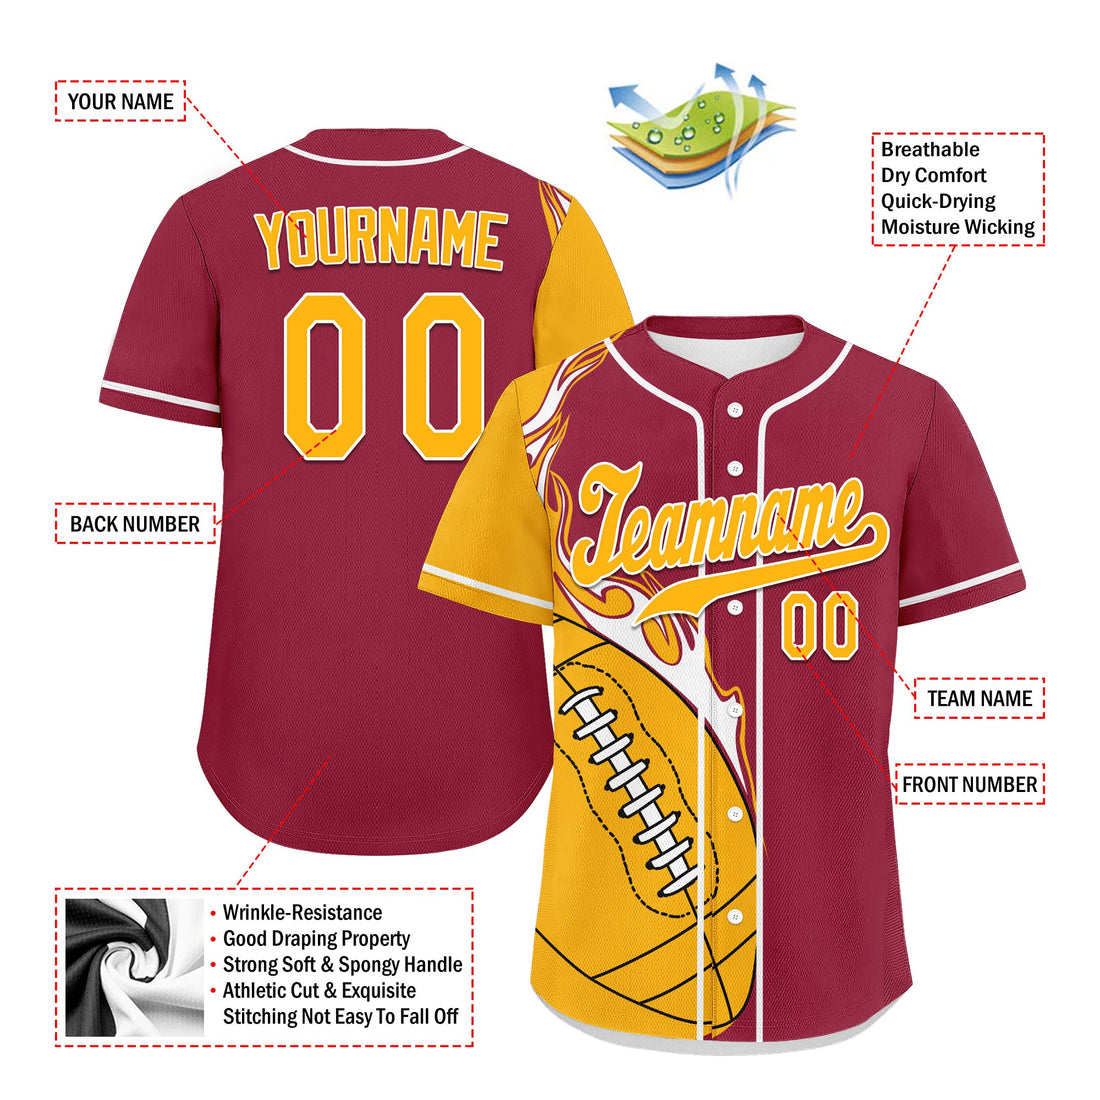 Custom Red Yellow Classic Style Personalized Authentic Baseball Jersey UN002-D0b0a00-b